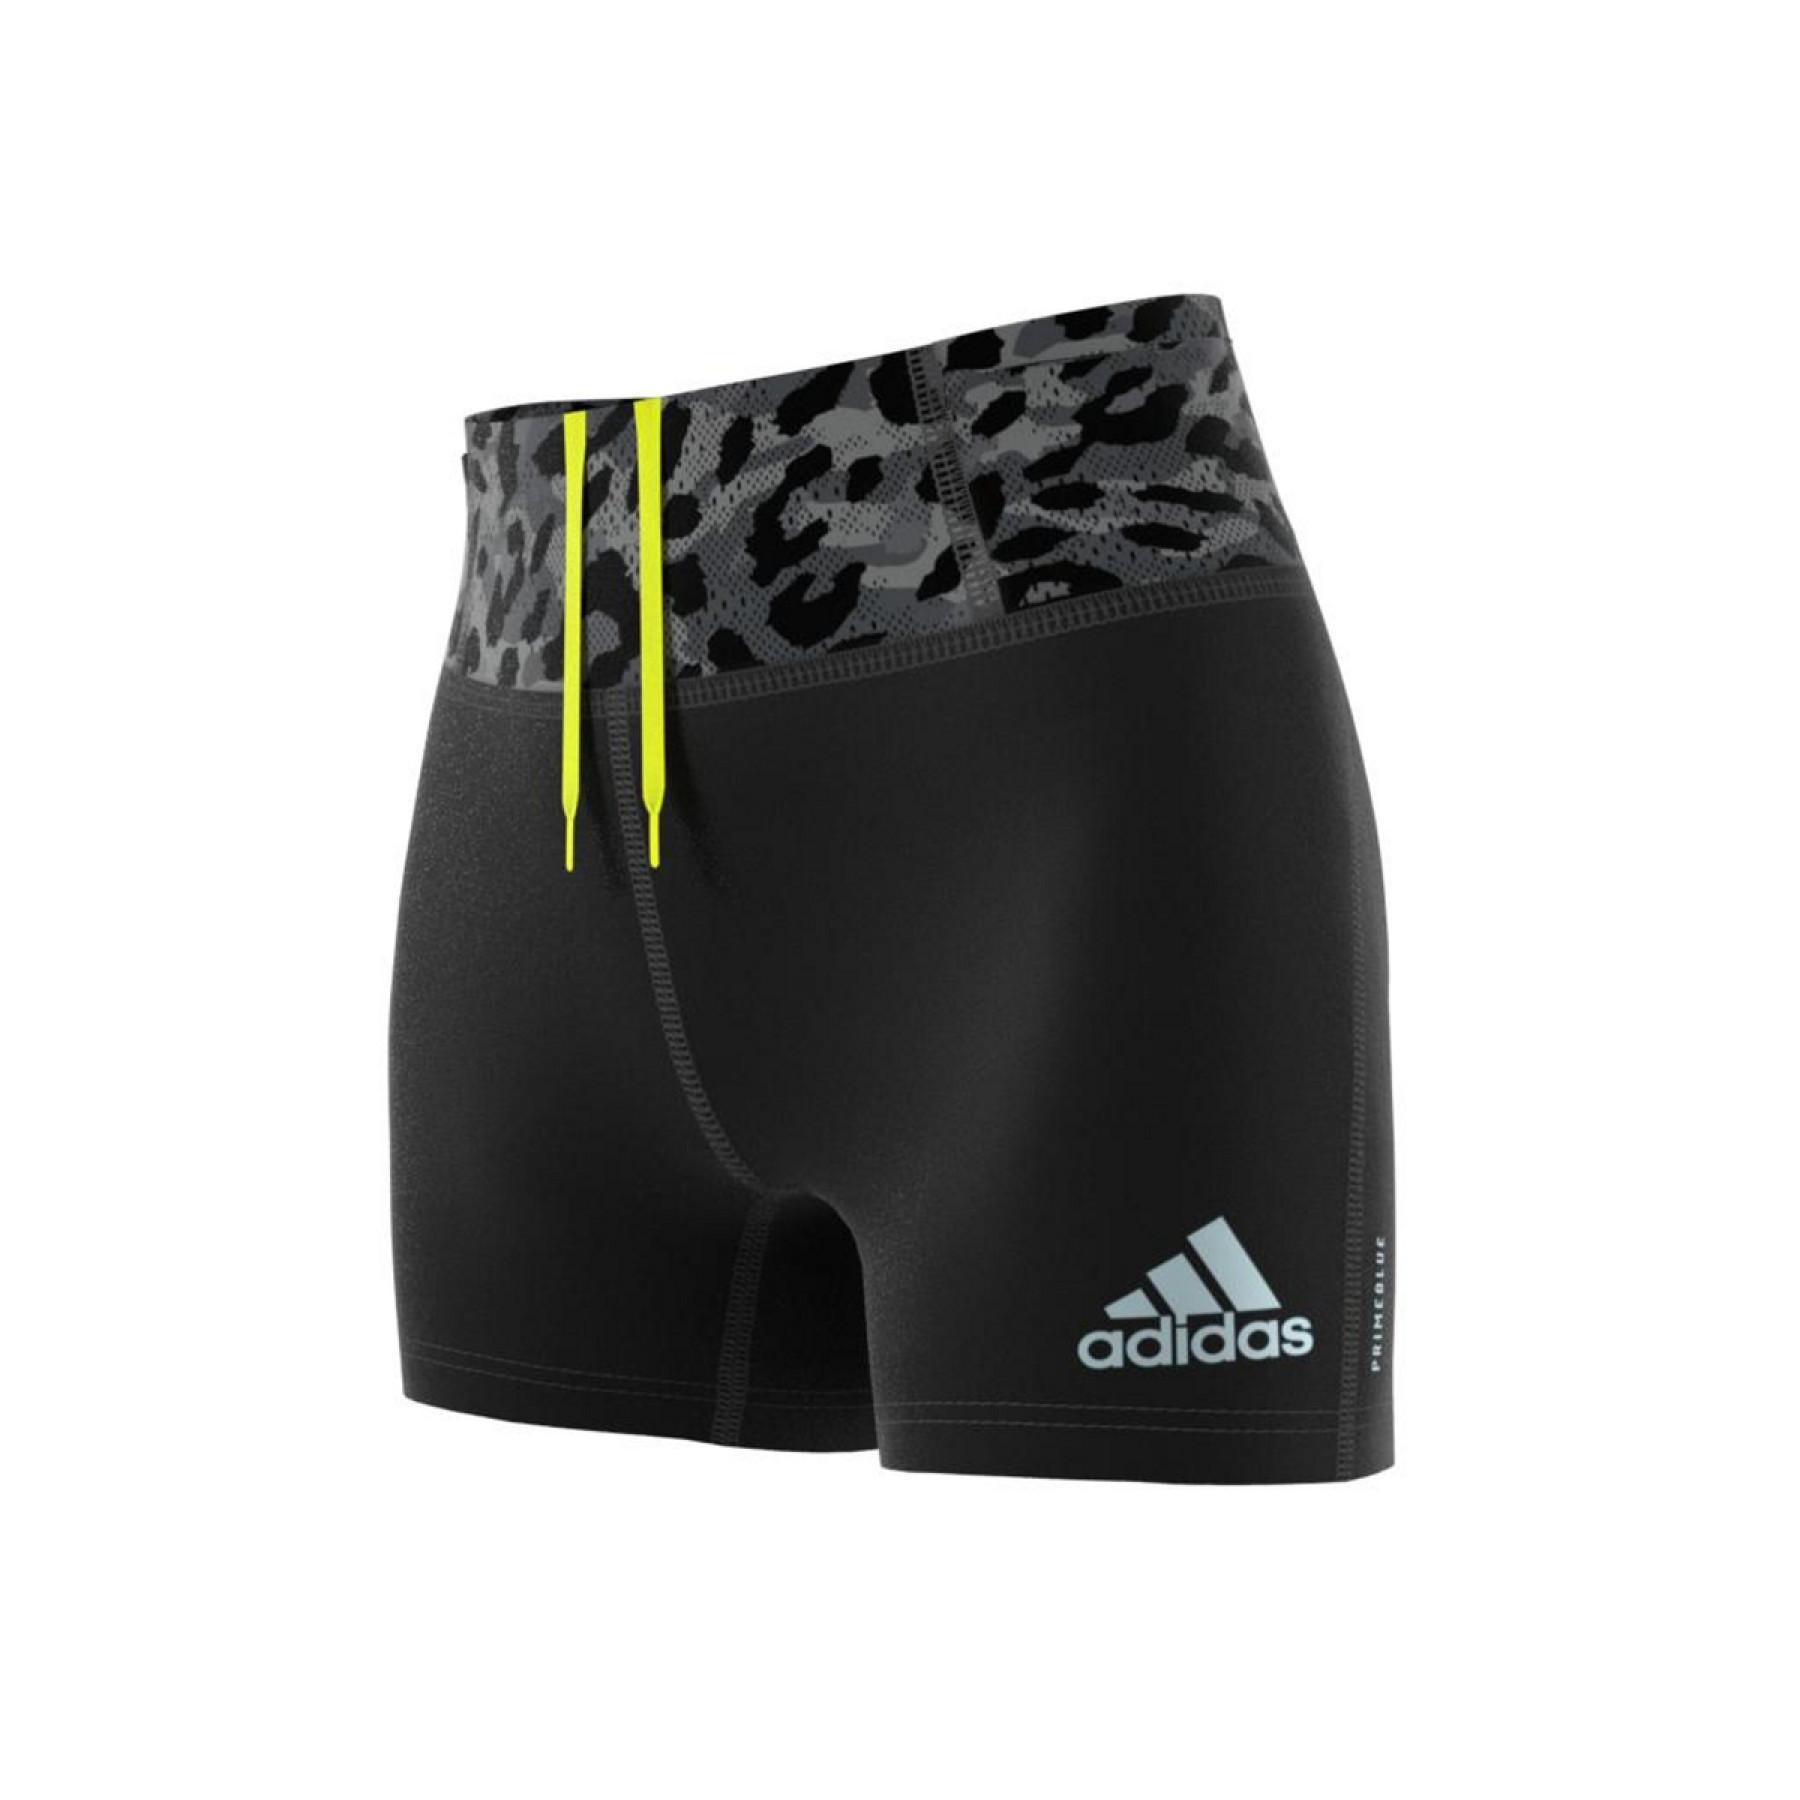 Women's shorts adidas Fast Primeblue Graphic Booty